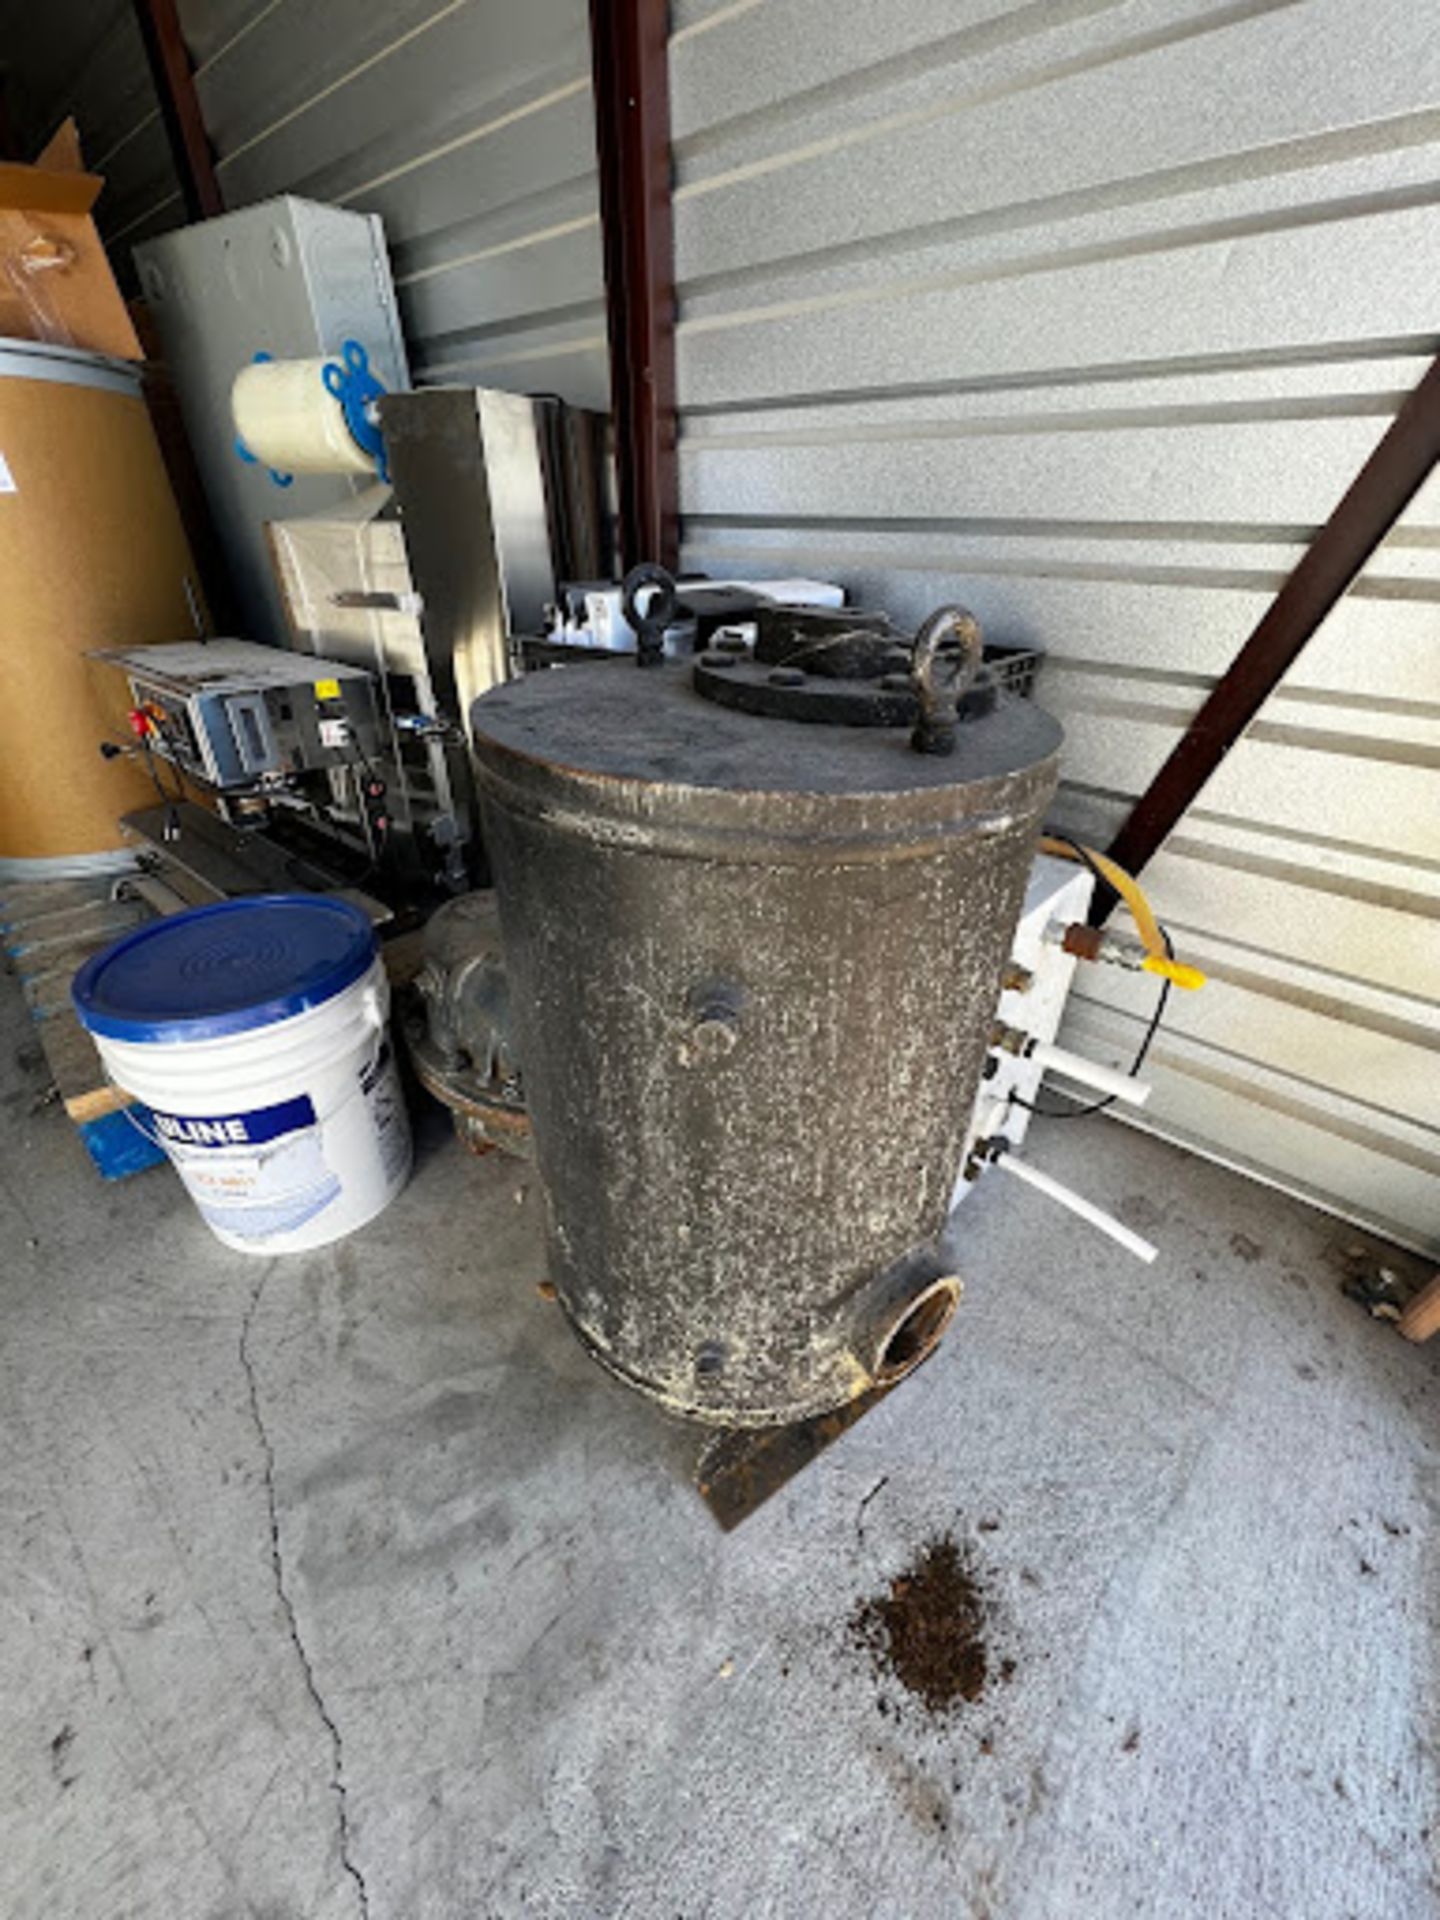 (Located in Georgetown, TX) Black Tanks, Qty 2, AIR ACTUATED CONDENSATE PUMP X2